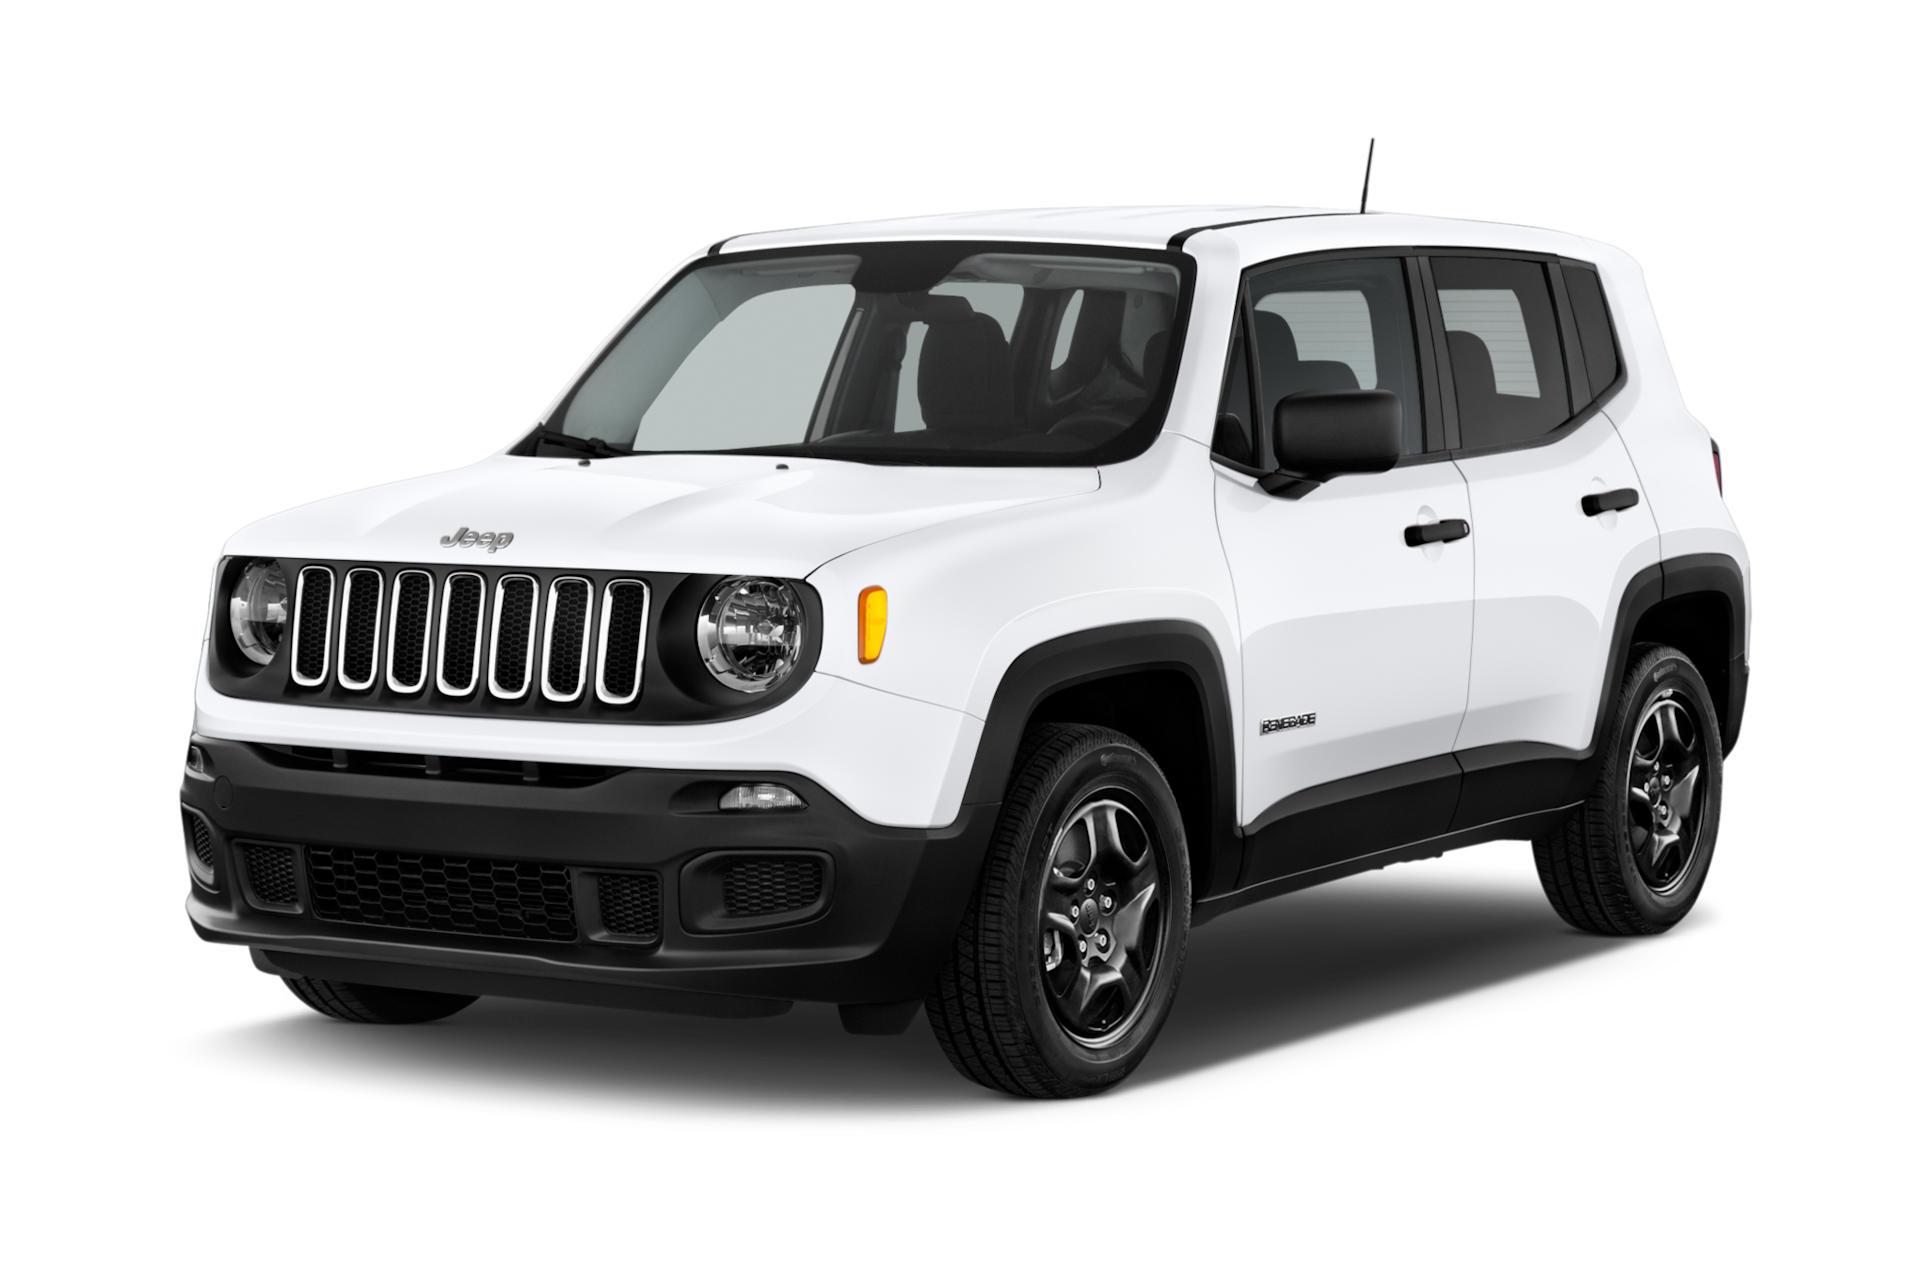 2015 Jeep Renegade Prices, Reviews, and Photos - MotorTrend